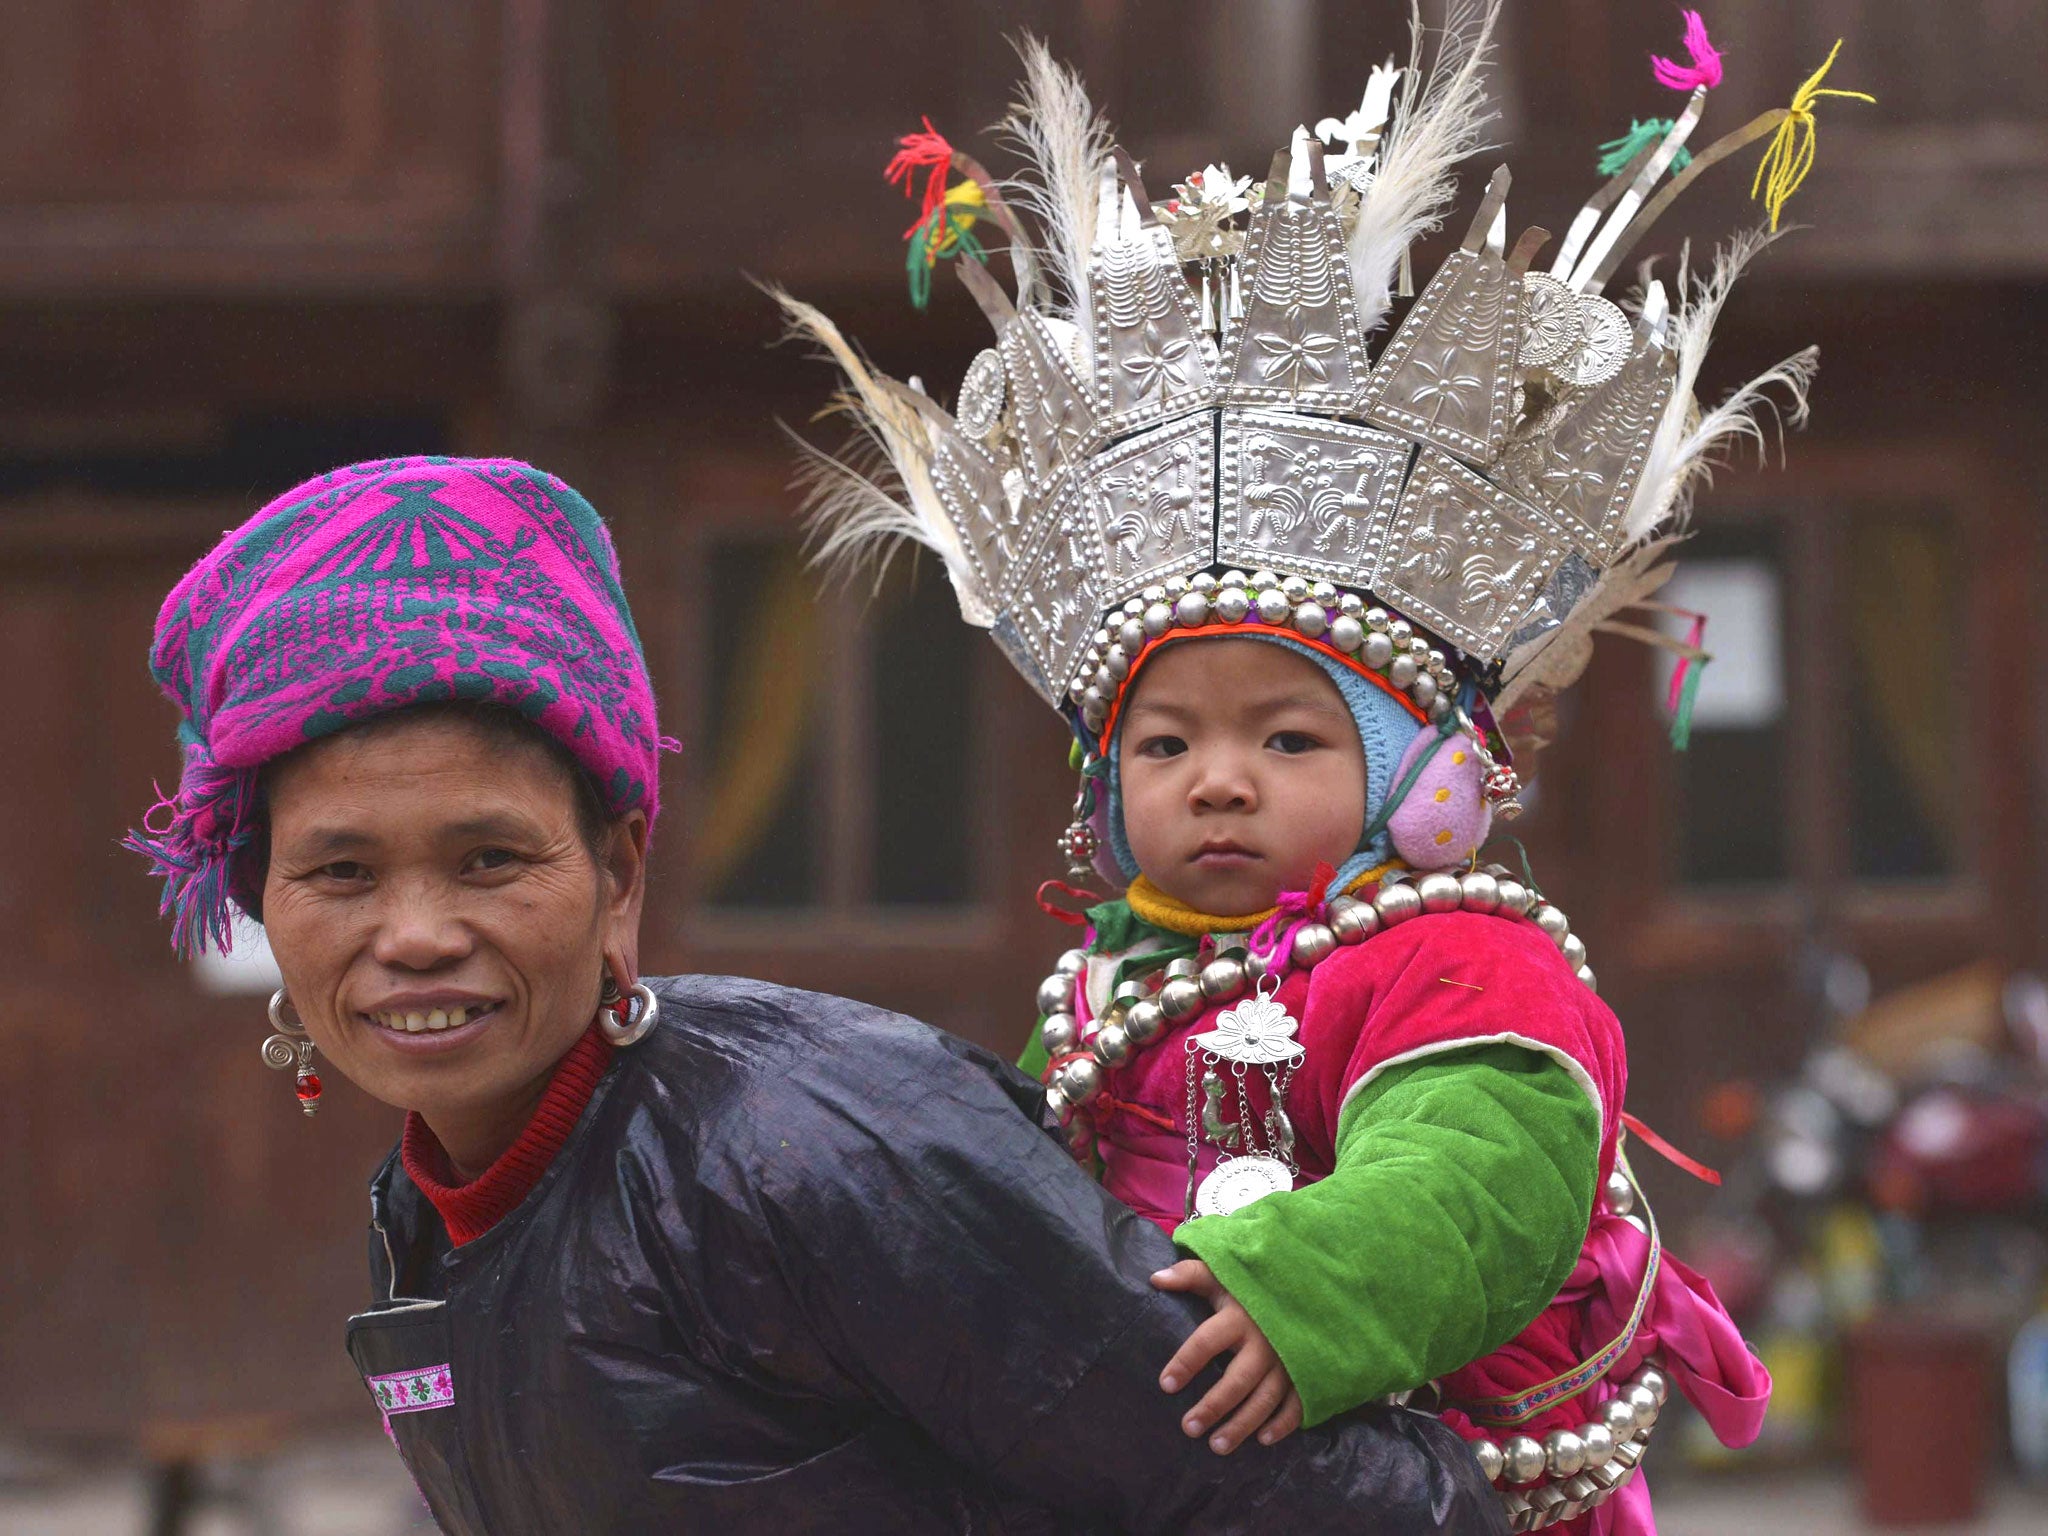 An ethnic Dong Minority woman in traditional costume carries a child on her back during a performance to celebrate the traditional Dong Minority festival 'Tai Guan Ren' in Huanggang village of Liping county, Guizhou province